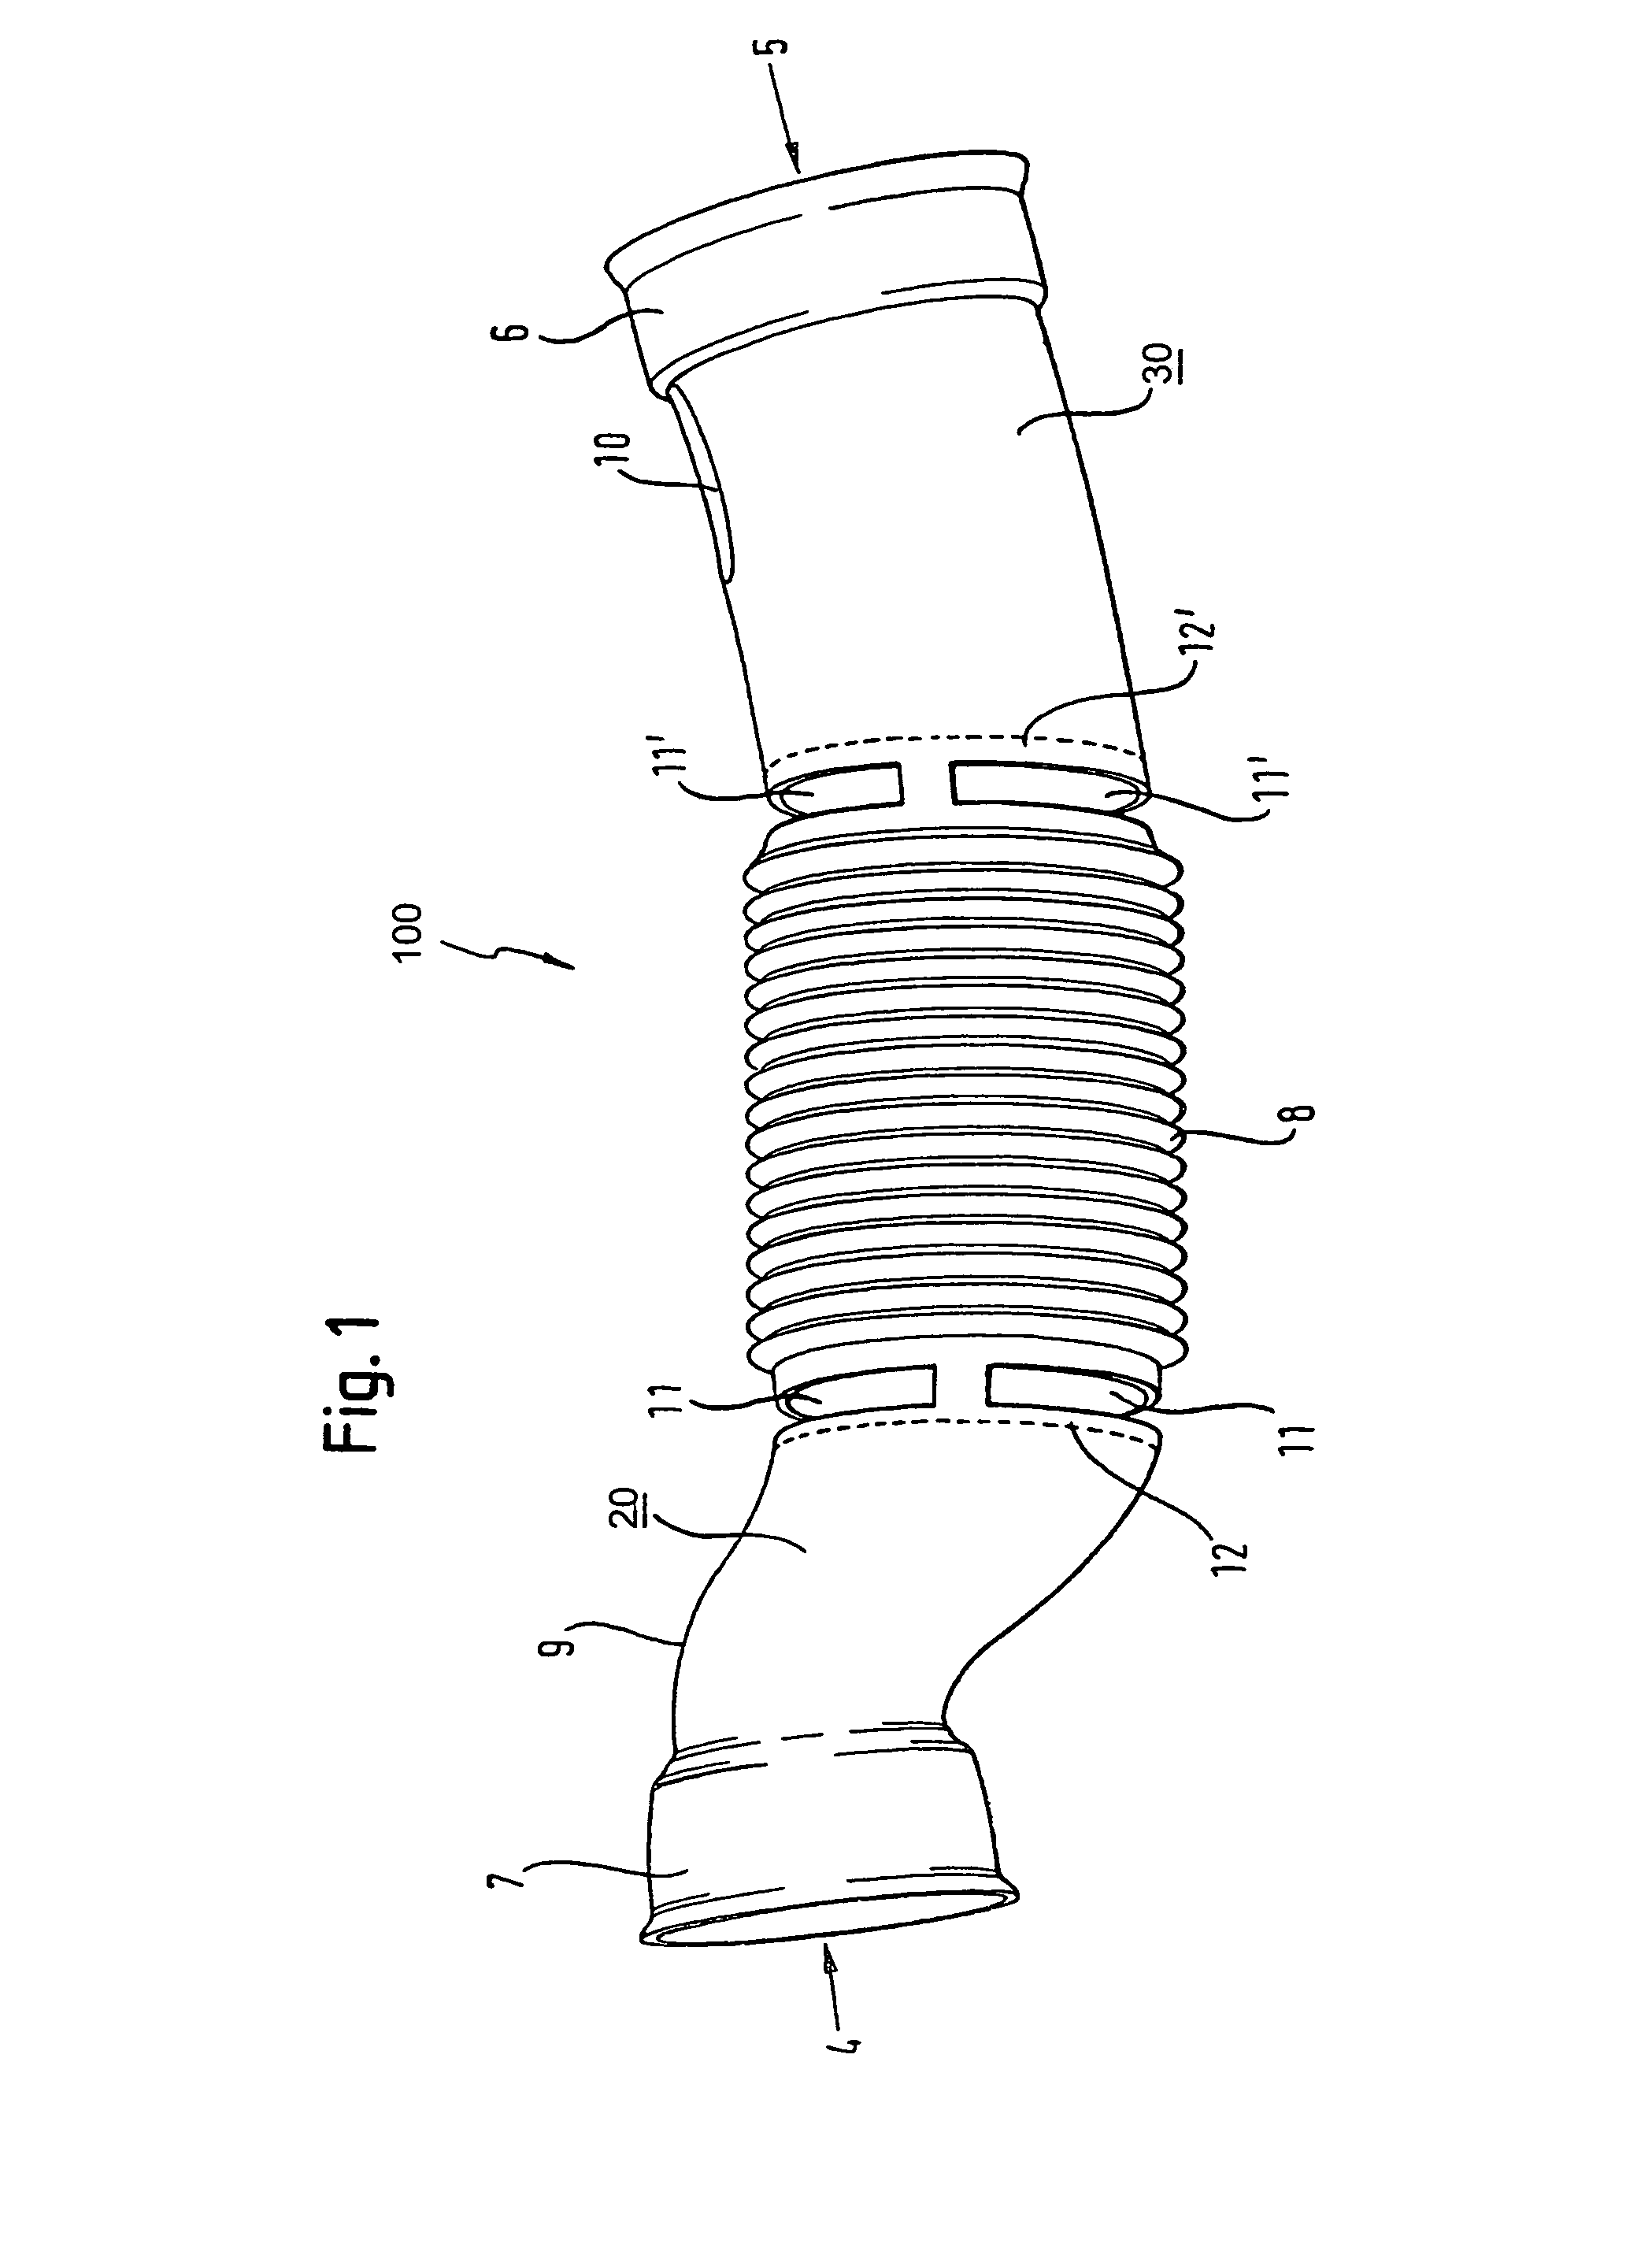 Fluid guideline, especially in the form of a tube for taking up untreated air in an air filter of a motor vehicle